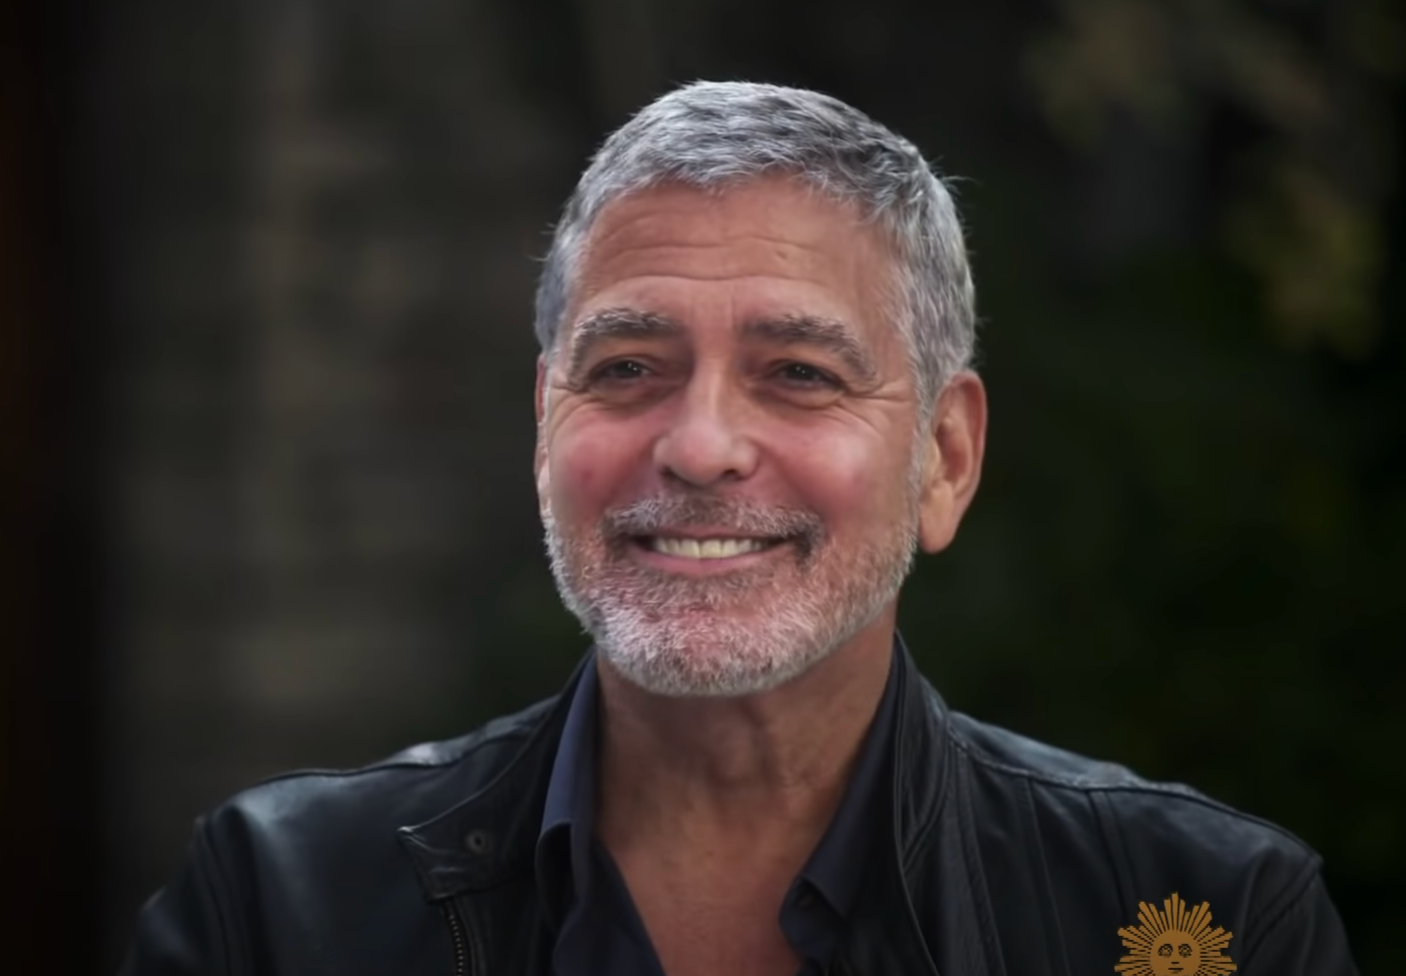 George Clooney giving another virtual interview in November 2020